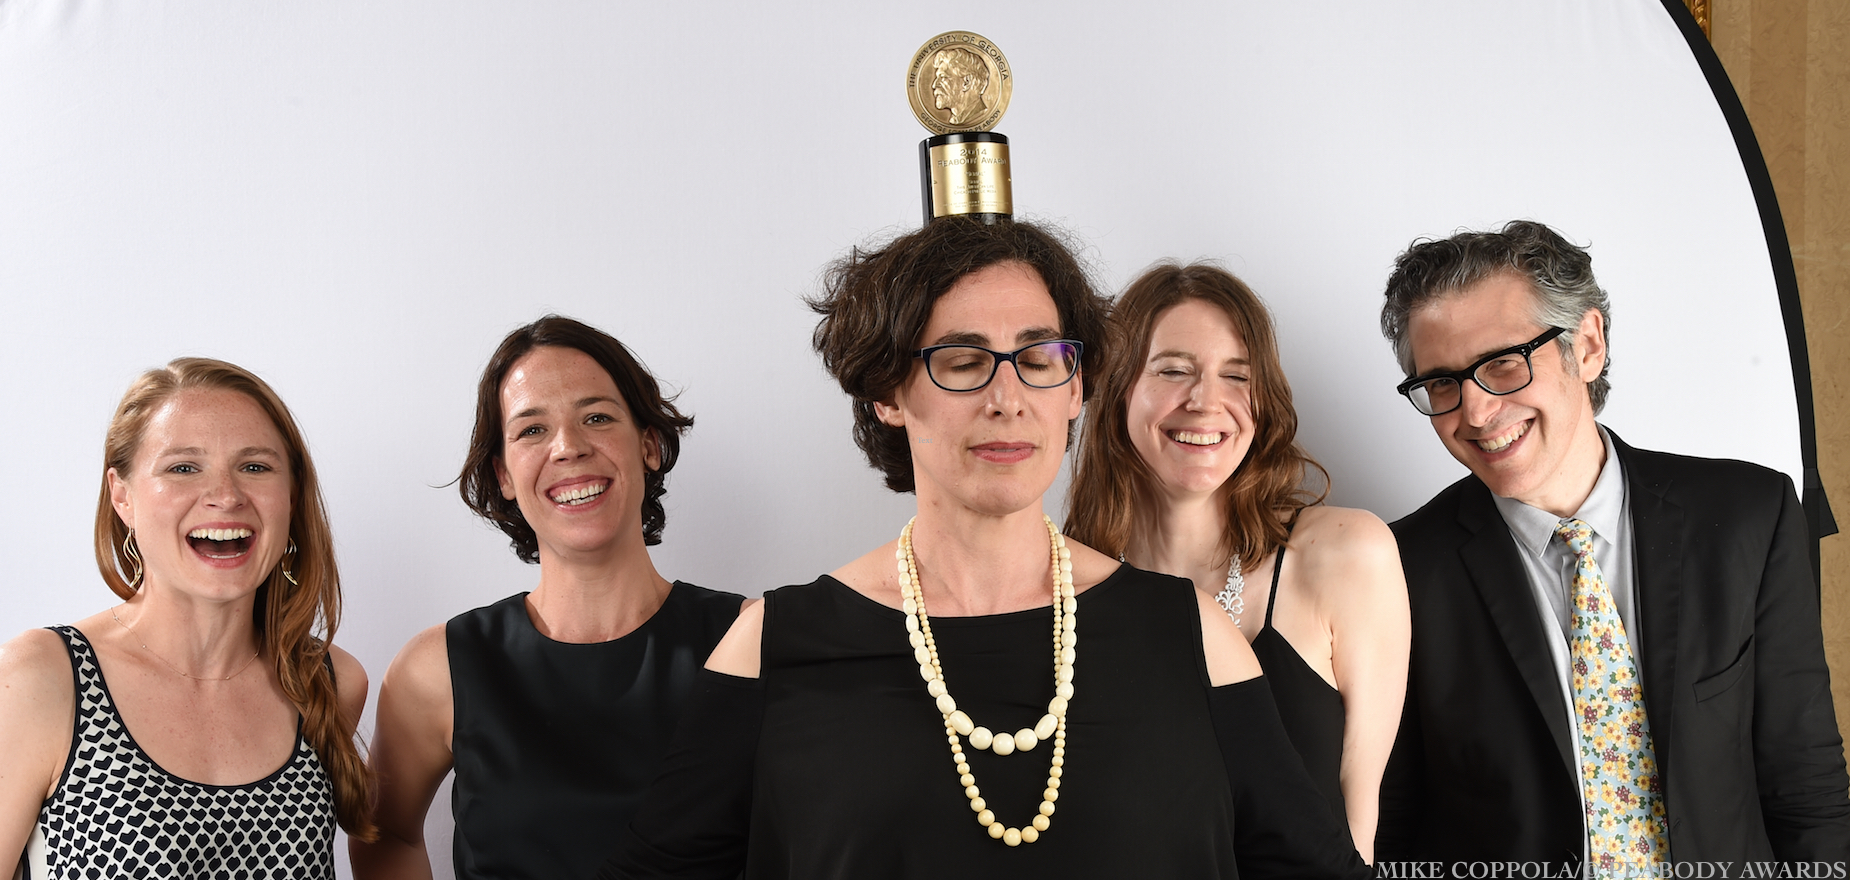 Serial Host Sarah Koenig Says She Set Out To Report, Not Exonerate